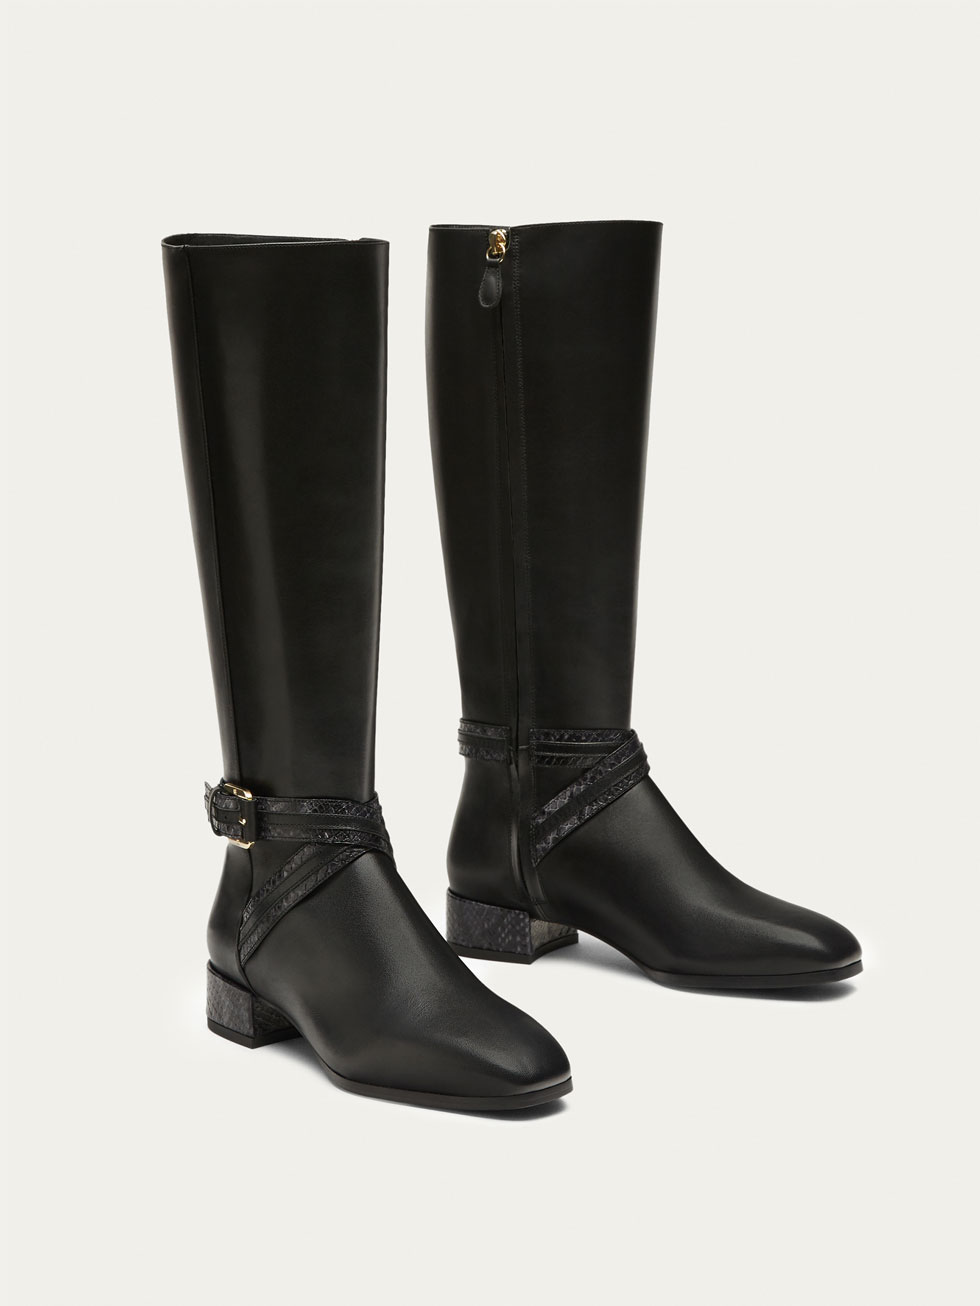 leather boots for women black lined leather boots - women - massimo dutti klurqli